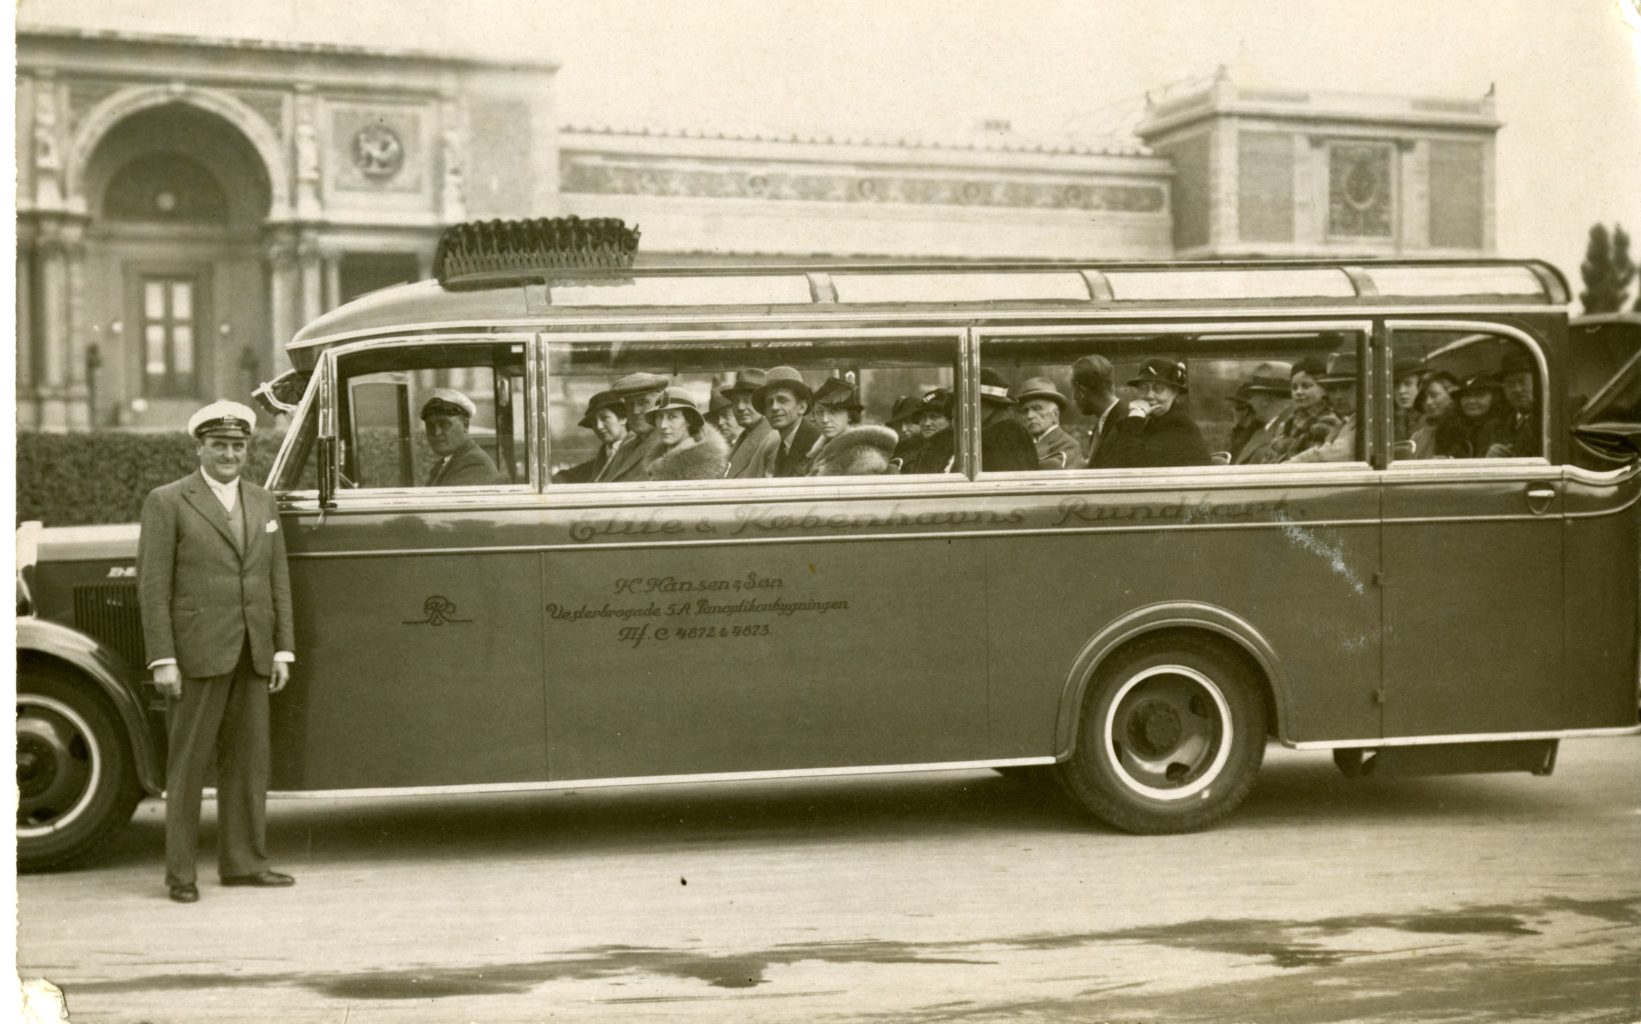 A man poses outside of a long bus with many people inside.